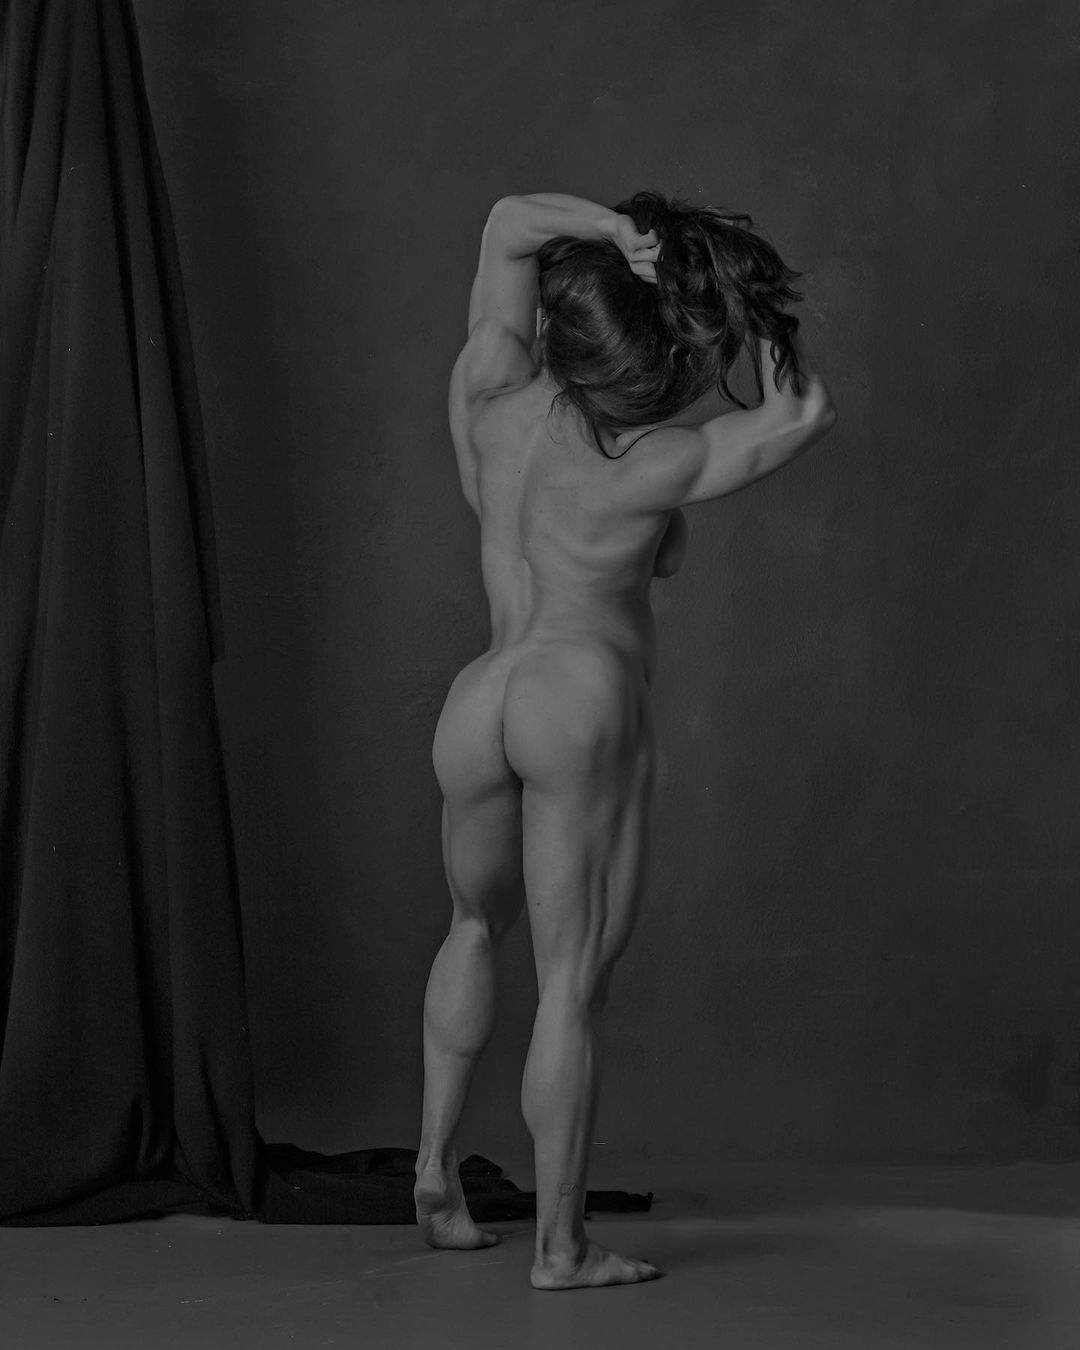 Taylor Mauro - NSFW, Bodybuilders, Sports girls, Strong girl, Booty, Torso, Black and white photo, The photo, Black and white, Back, Longpost, Taylor Mauro, Girls